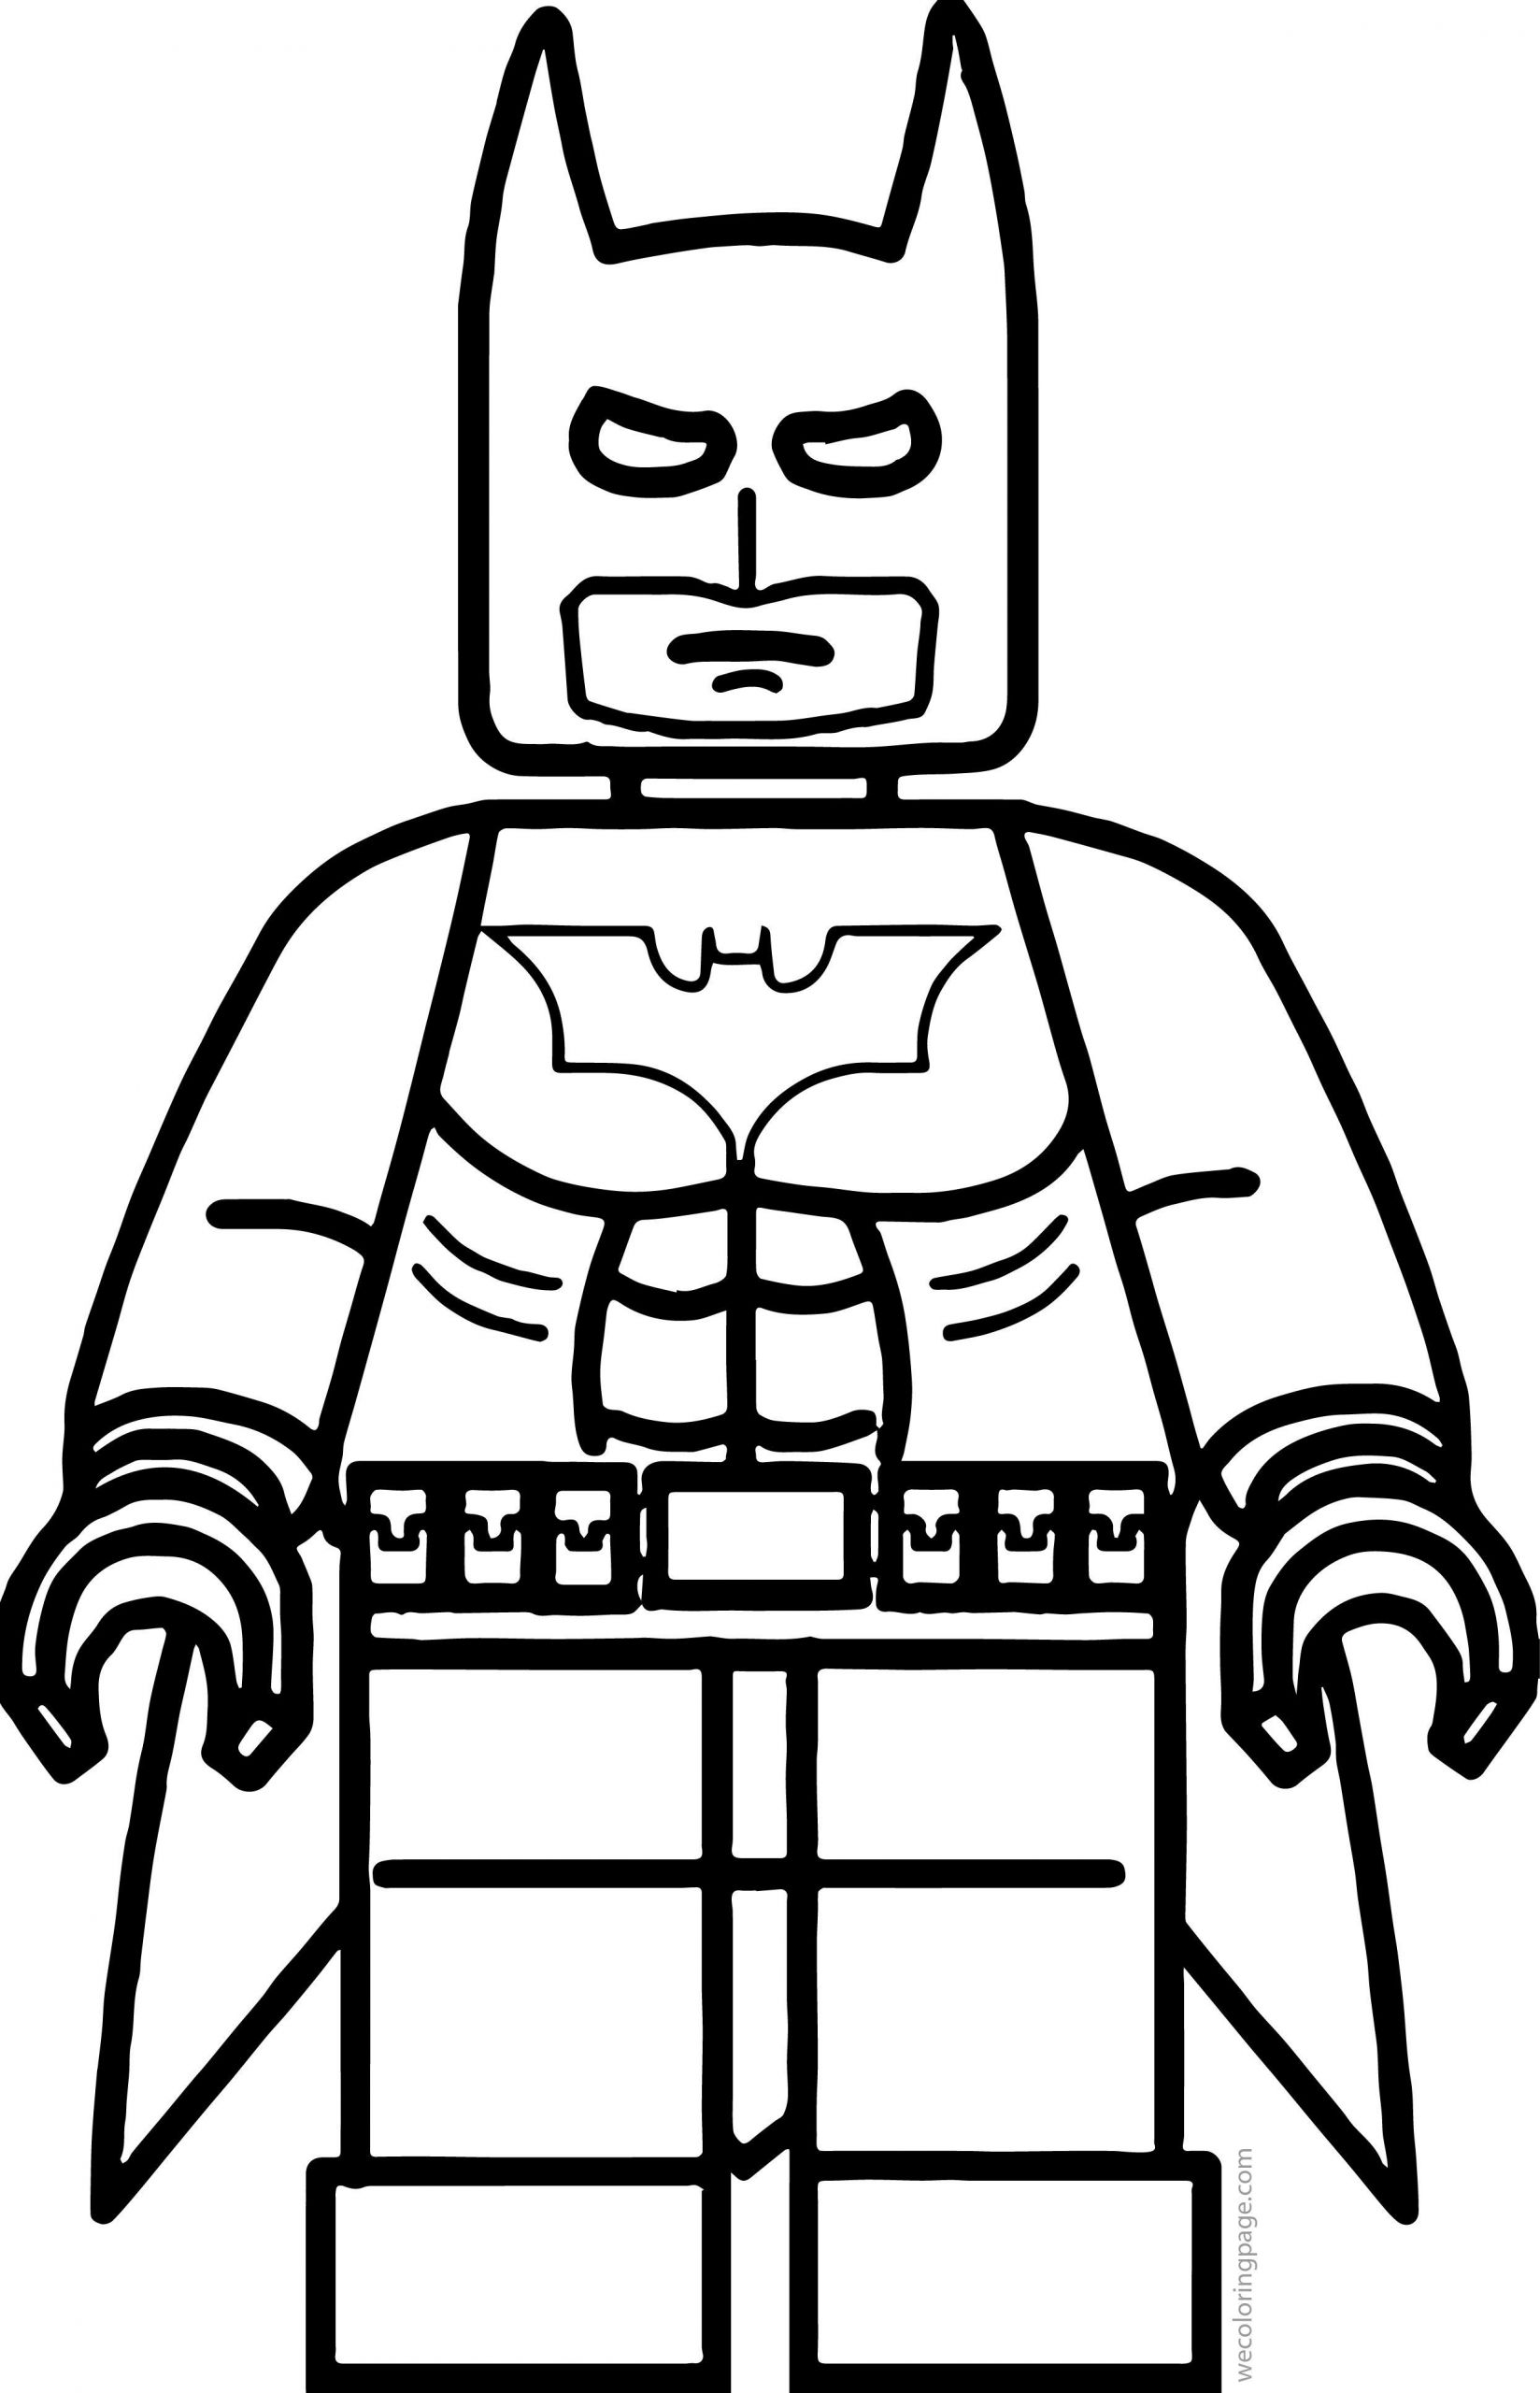 Coloring Pages For Boys Lego
 Lego Batman Coloring Page Rock art